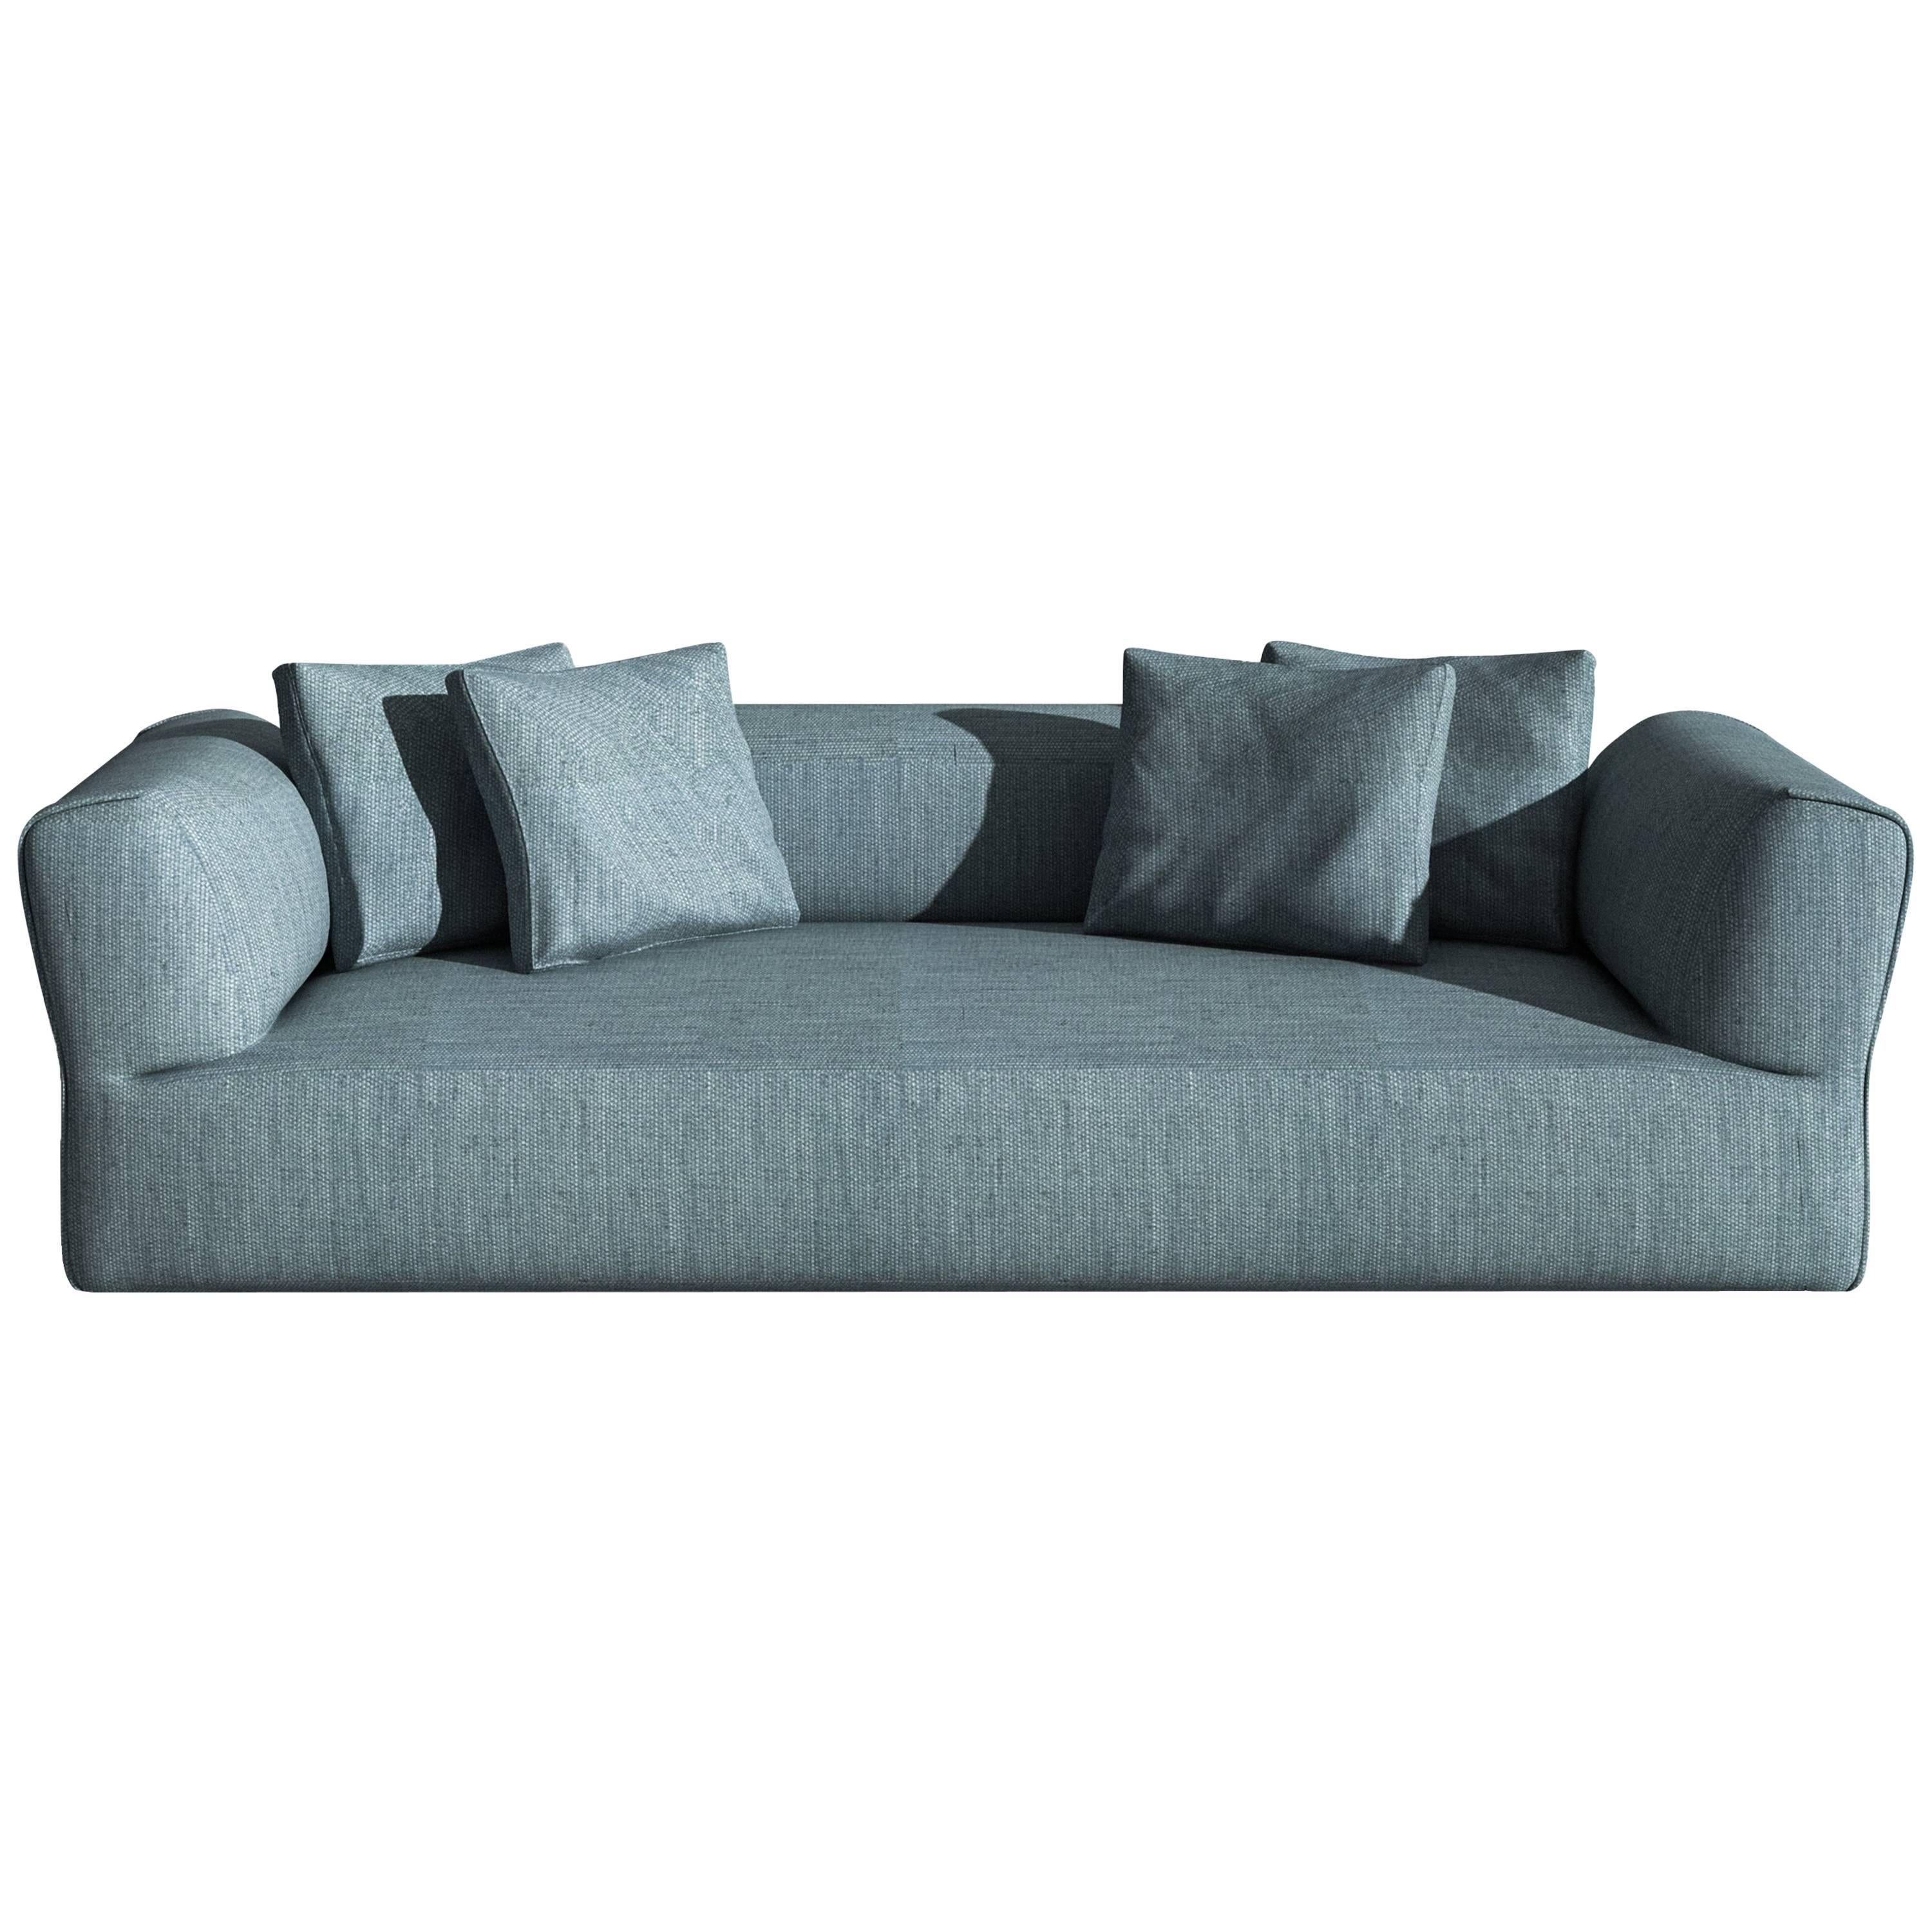 Ludovica +Roberto Palomba Driade "Rever" Three-Seat Sectional Sofa, 2017 For Sale